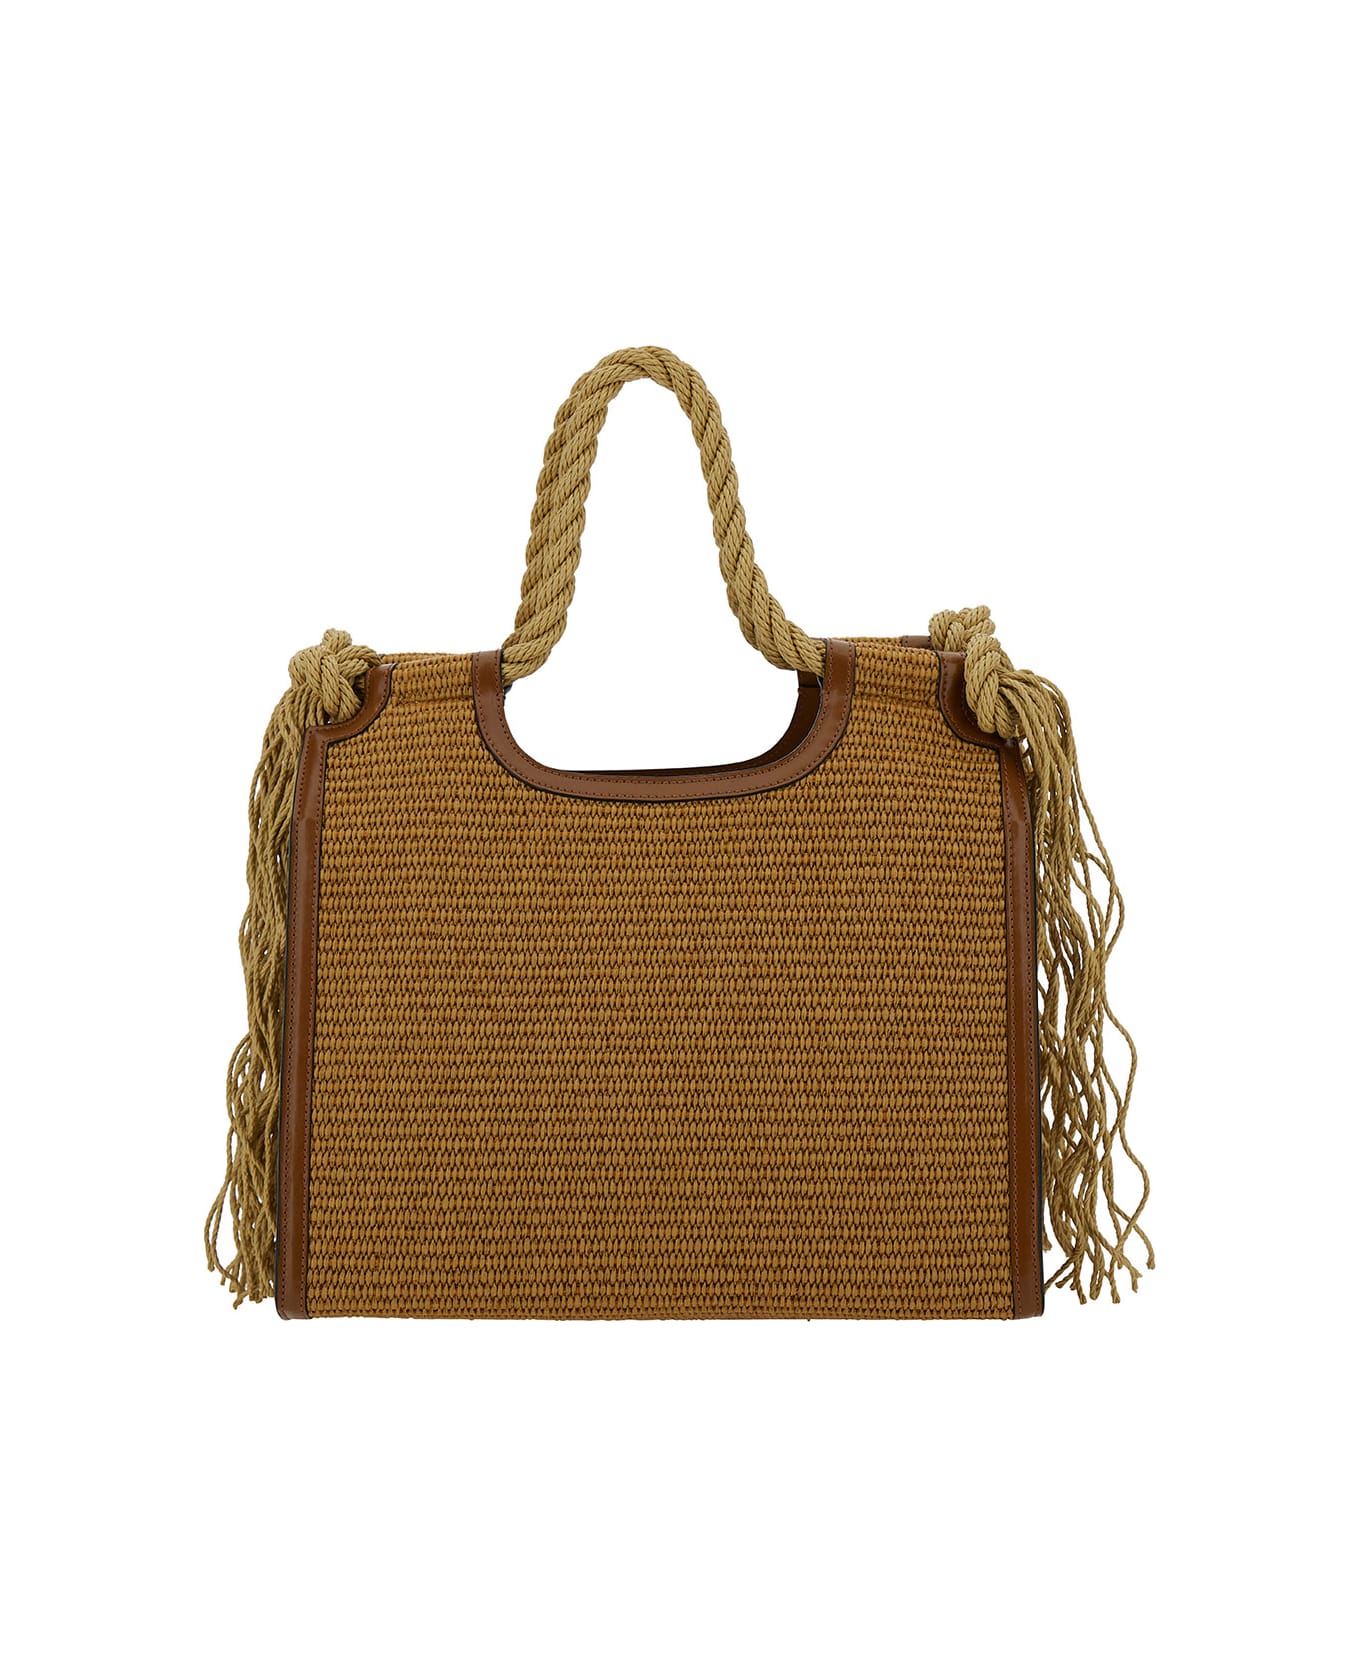 Marni 'summer' Beige Tote Bag With Cord Handles And Logo Detail In Rafia Woman - Beige